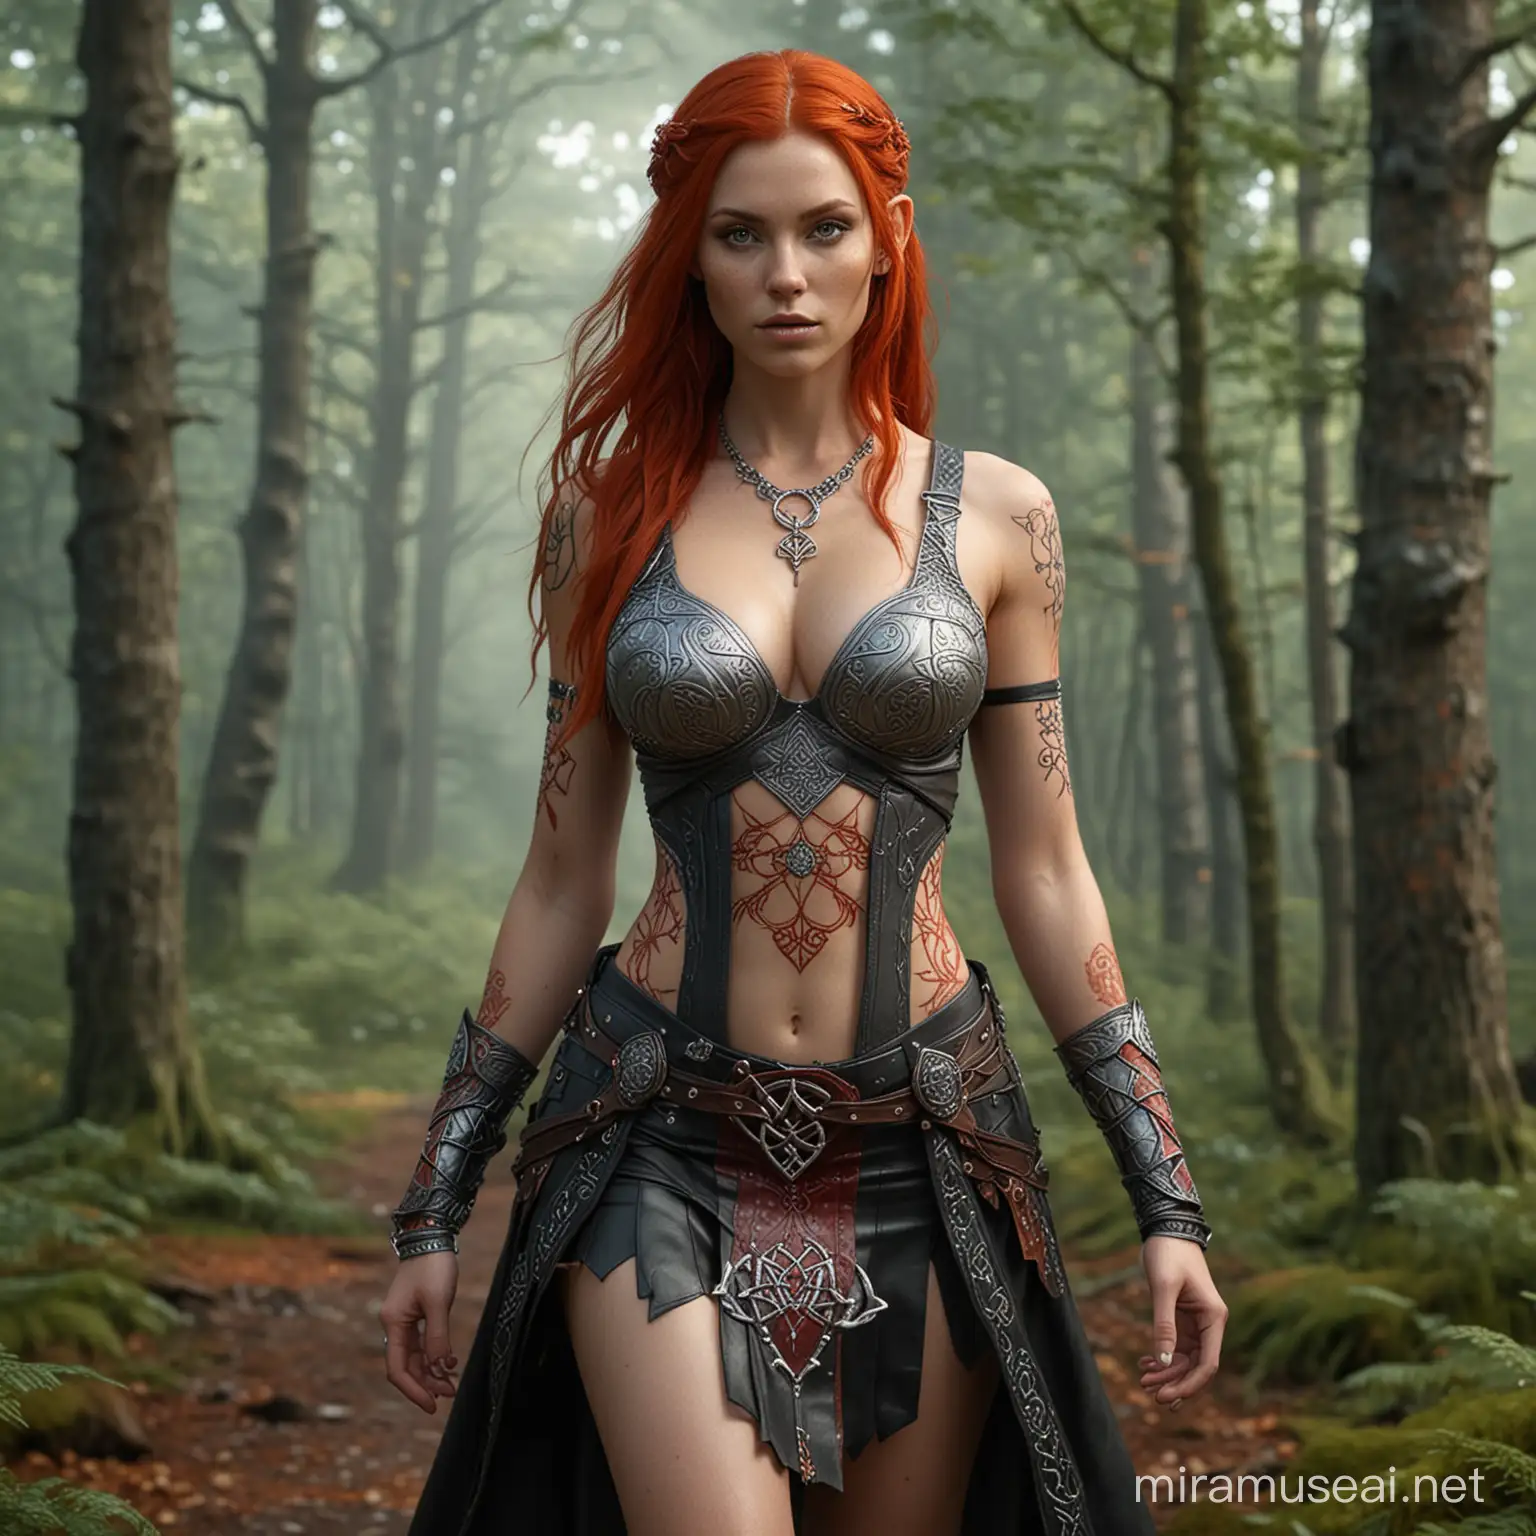 hyperrealistic extreme detail full body long shot showing an anatomically correct female human with large breasts, with fiery red hair decorated with silver, draconic symbols carved into the skin on arms and body. wearing a minimal sleeveless open front leather top that is decorated with celtic runes. wearing a short loose skirt embroided with colourful elven symbols. in a forest